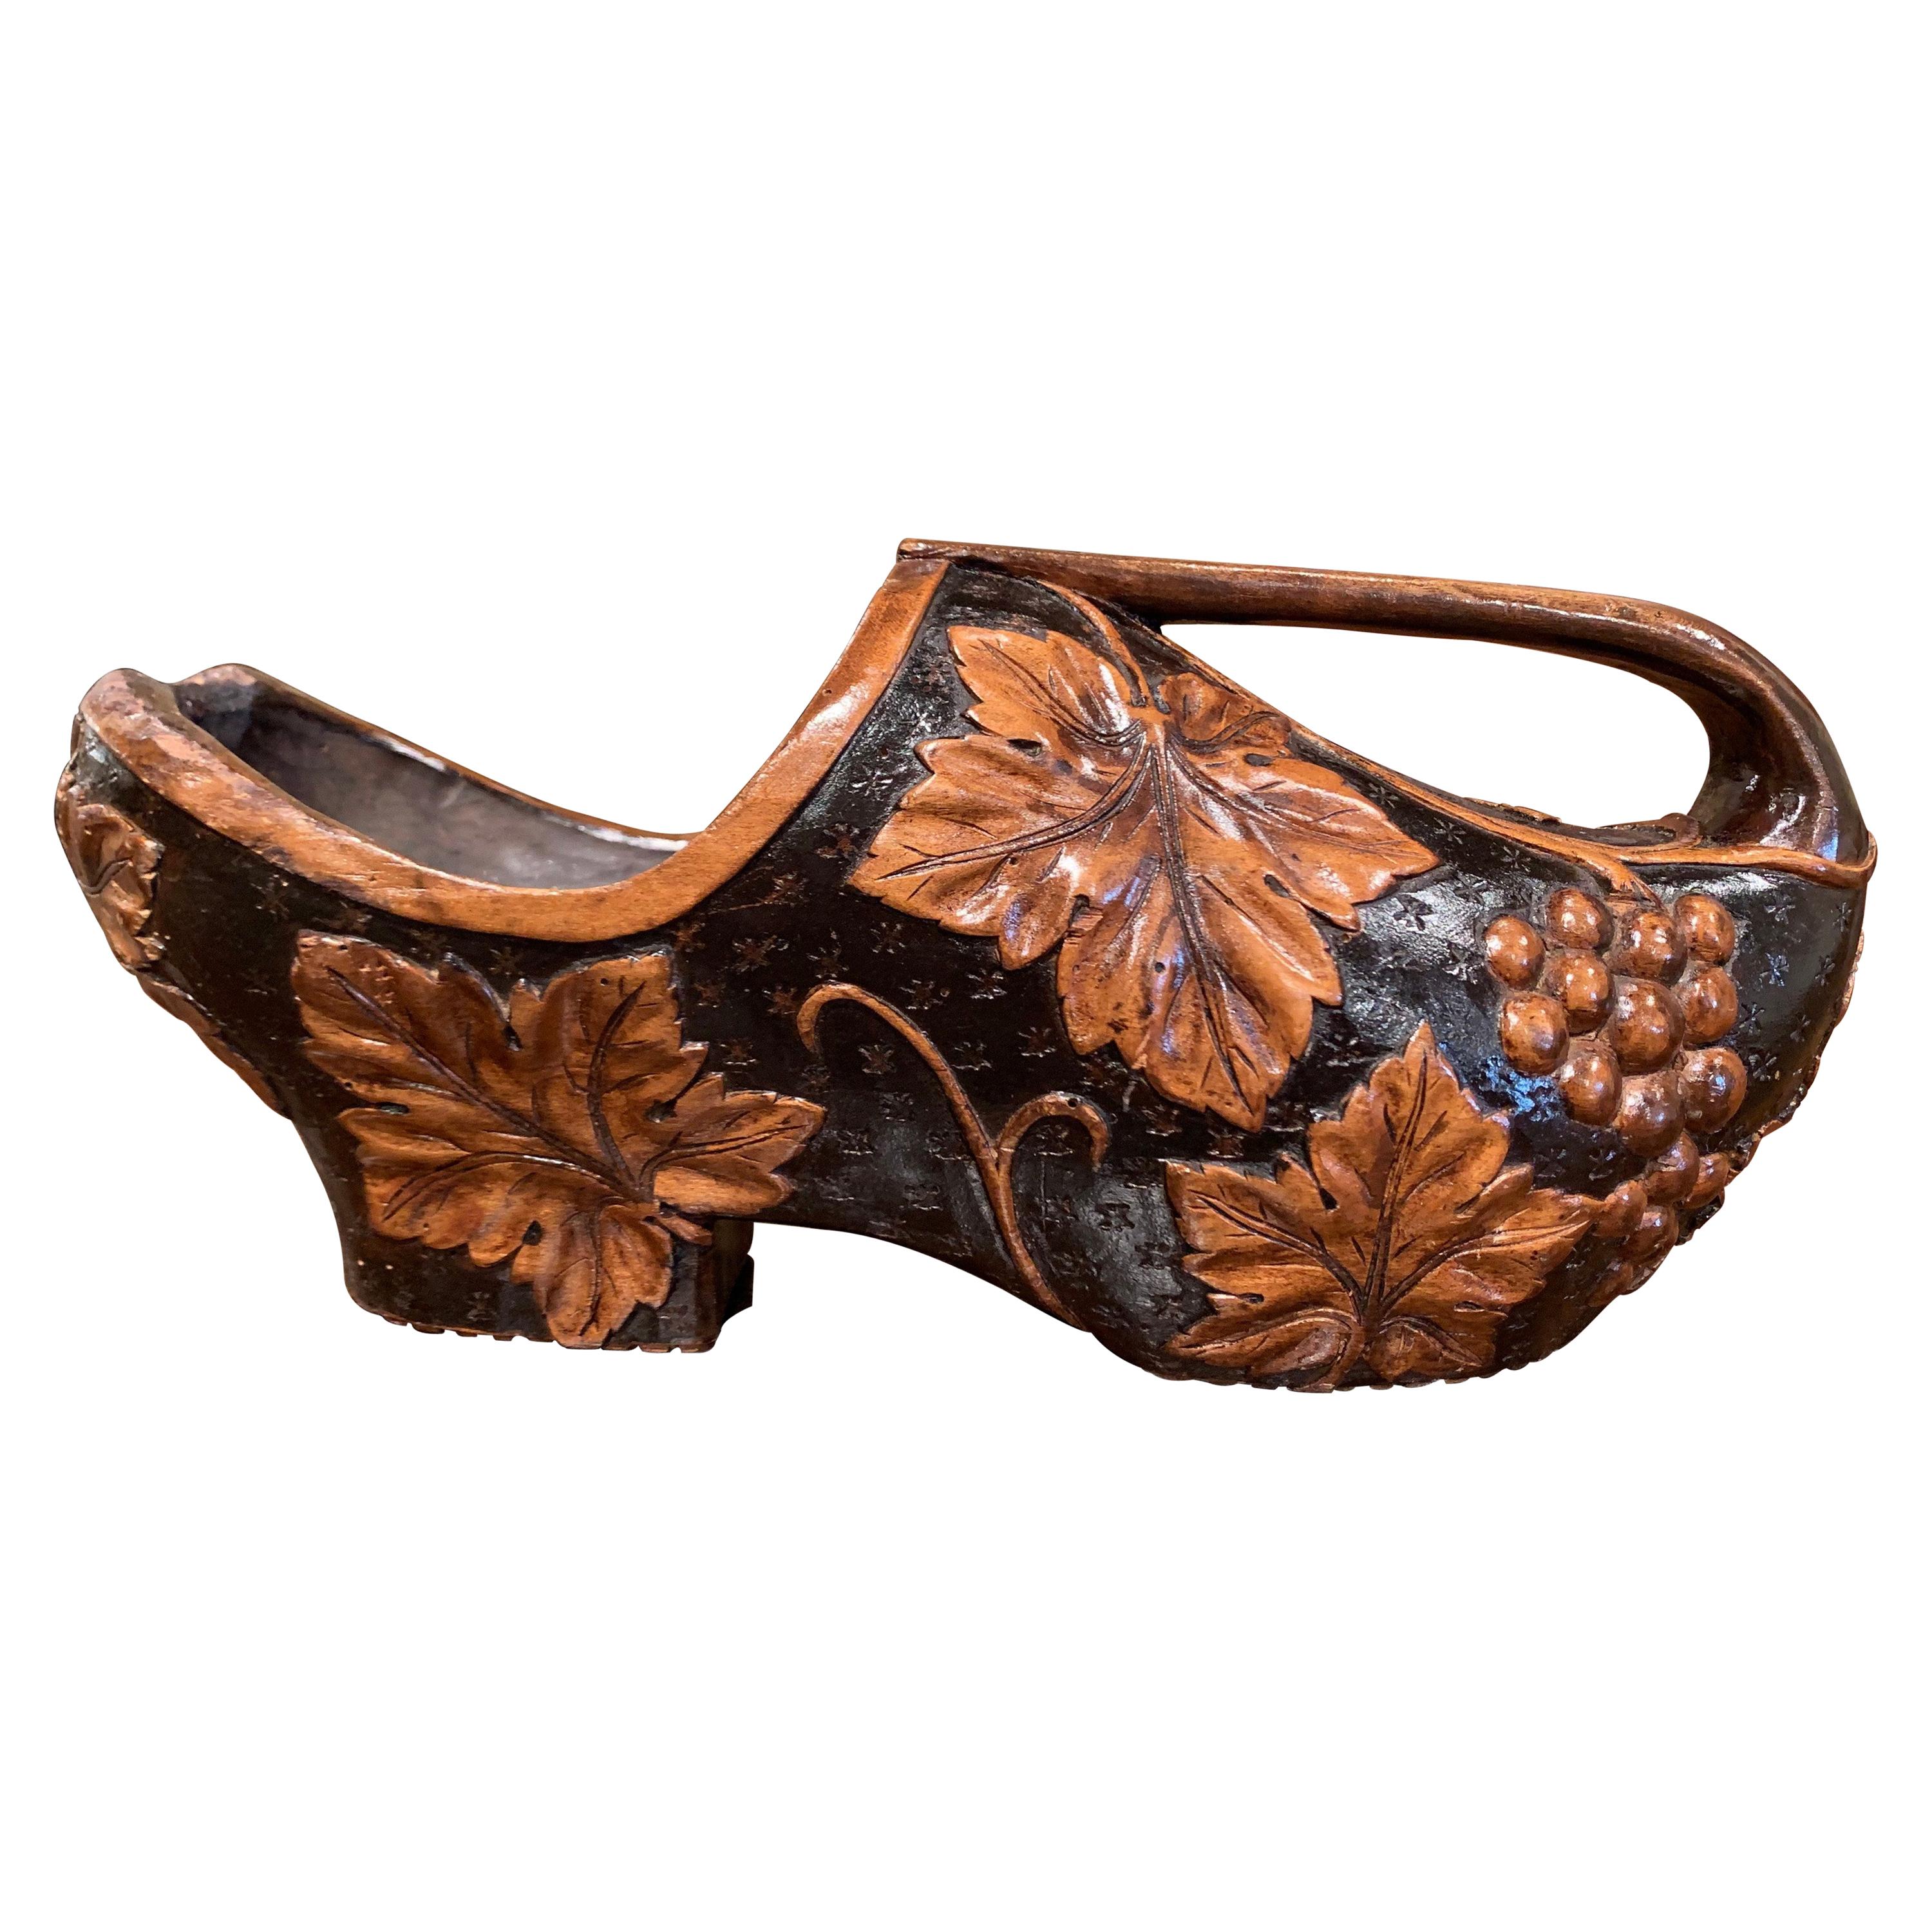 Early 20th Century French Carved Walnut Wine Bottle Holder Clog with Vine Decor